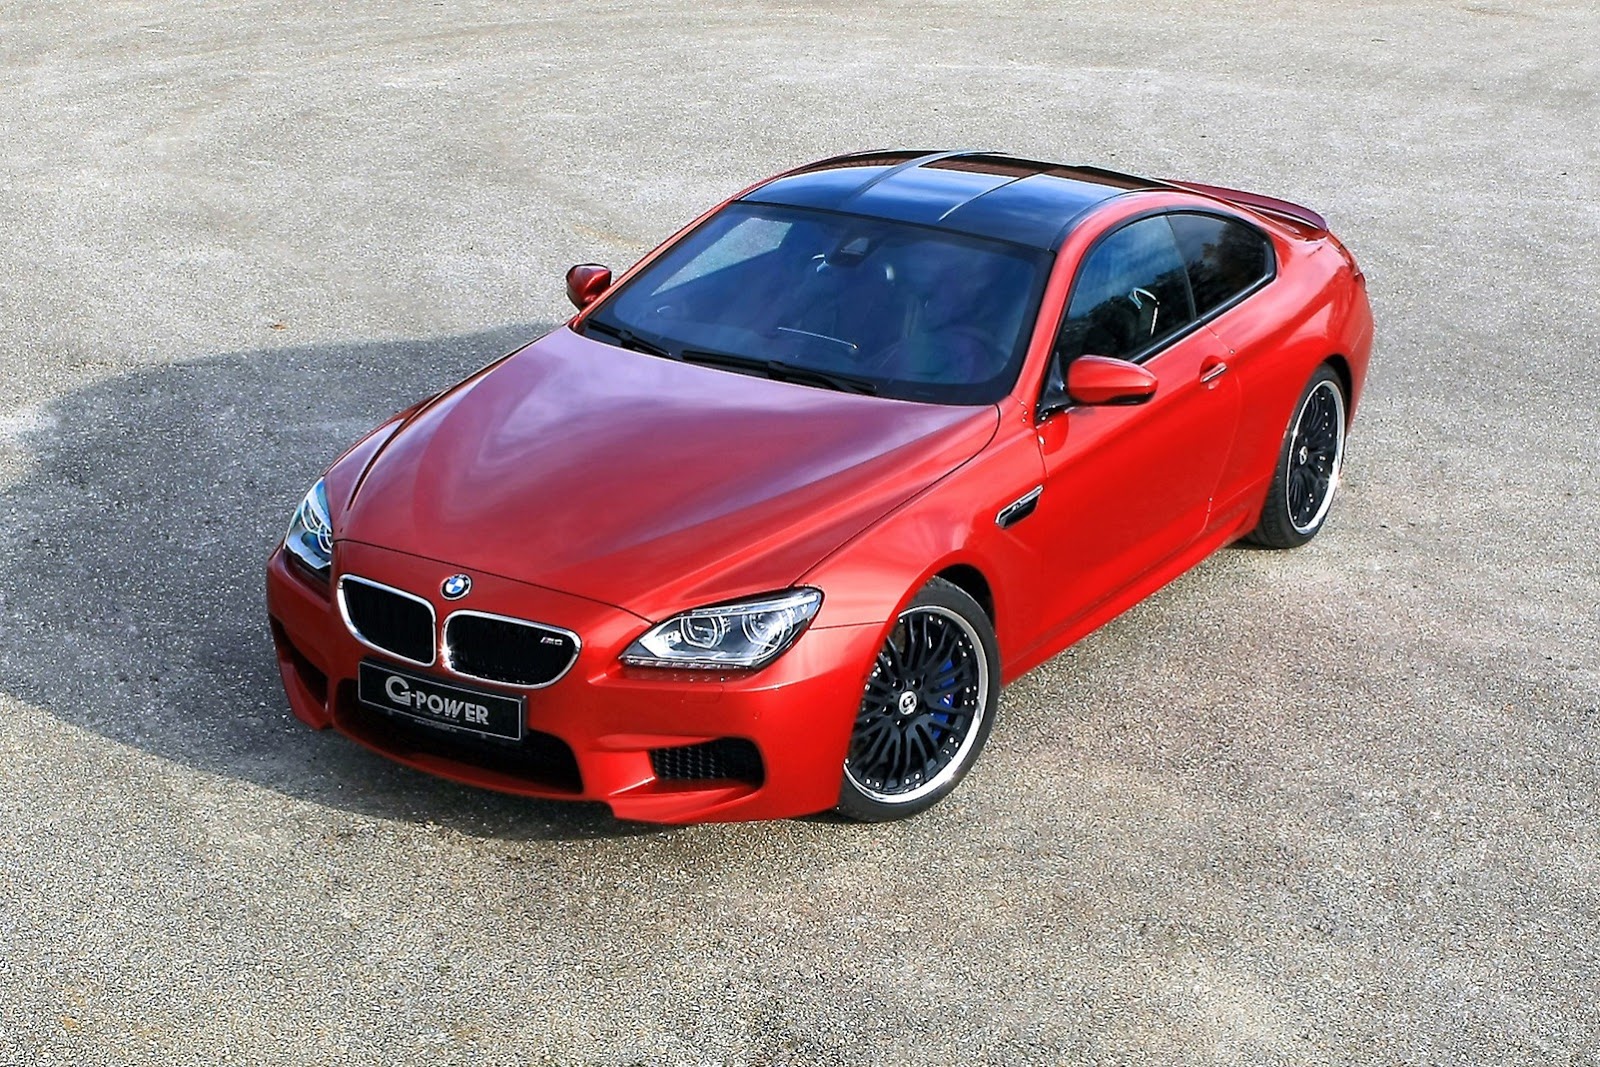 G-Power tunes the new F12 BMW M6 Coupe